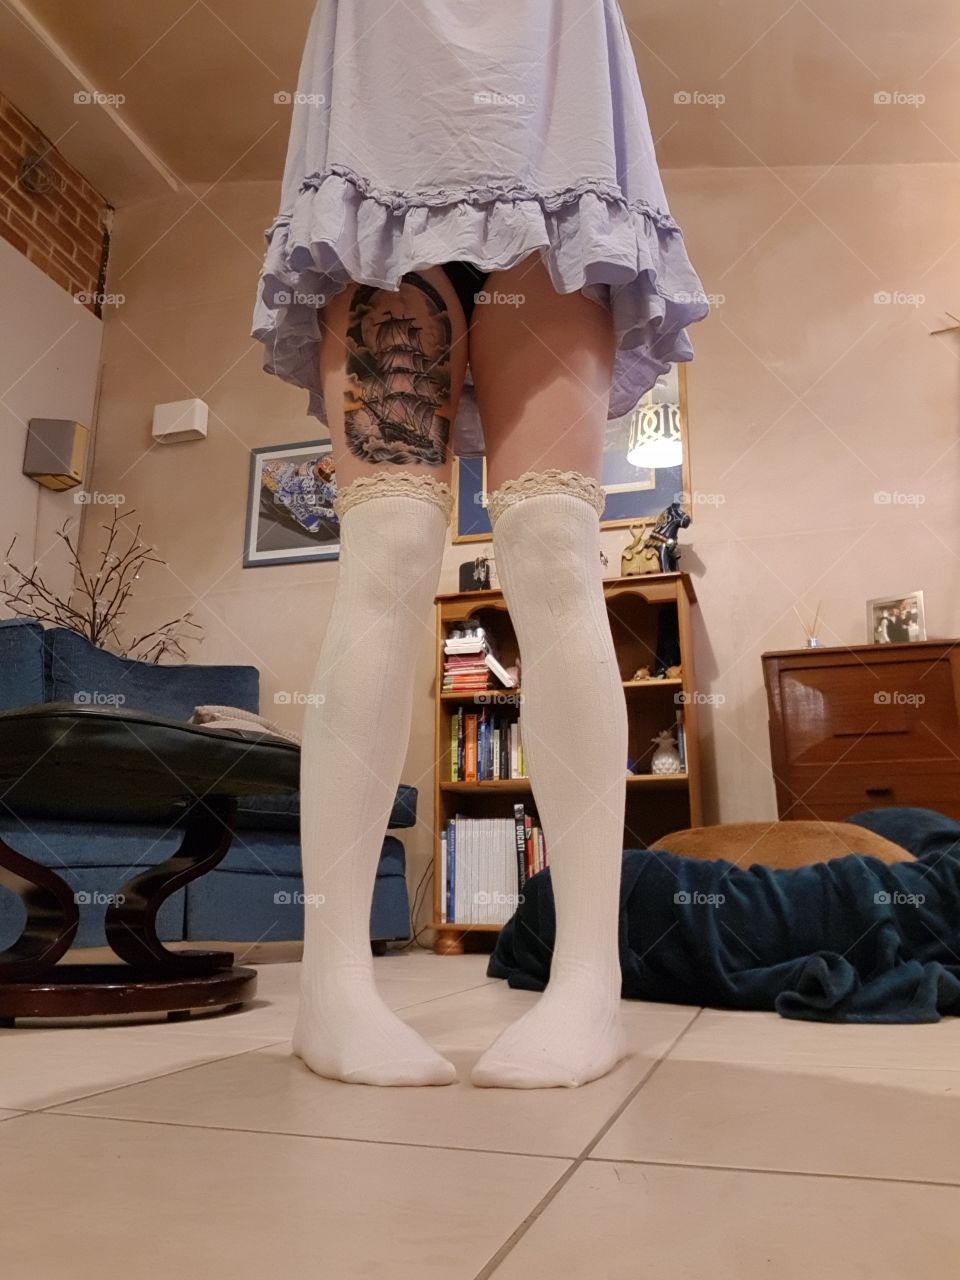 standing in a front room, not sure what to do. dont know what time day or night, thigh high socks on long tattooed legs wearing a nighty while the dog sleeps.